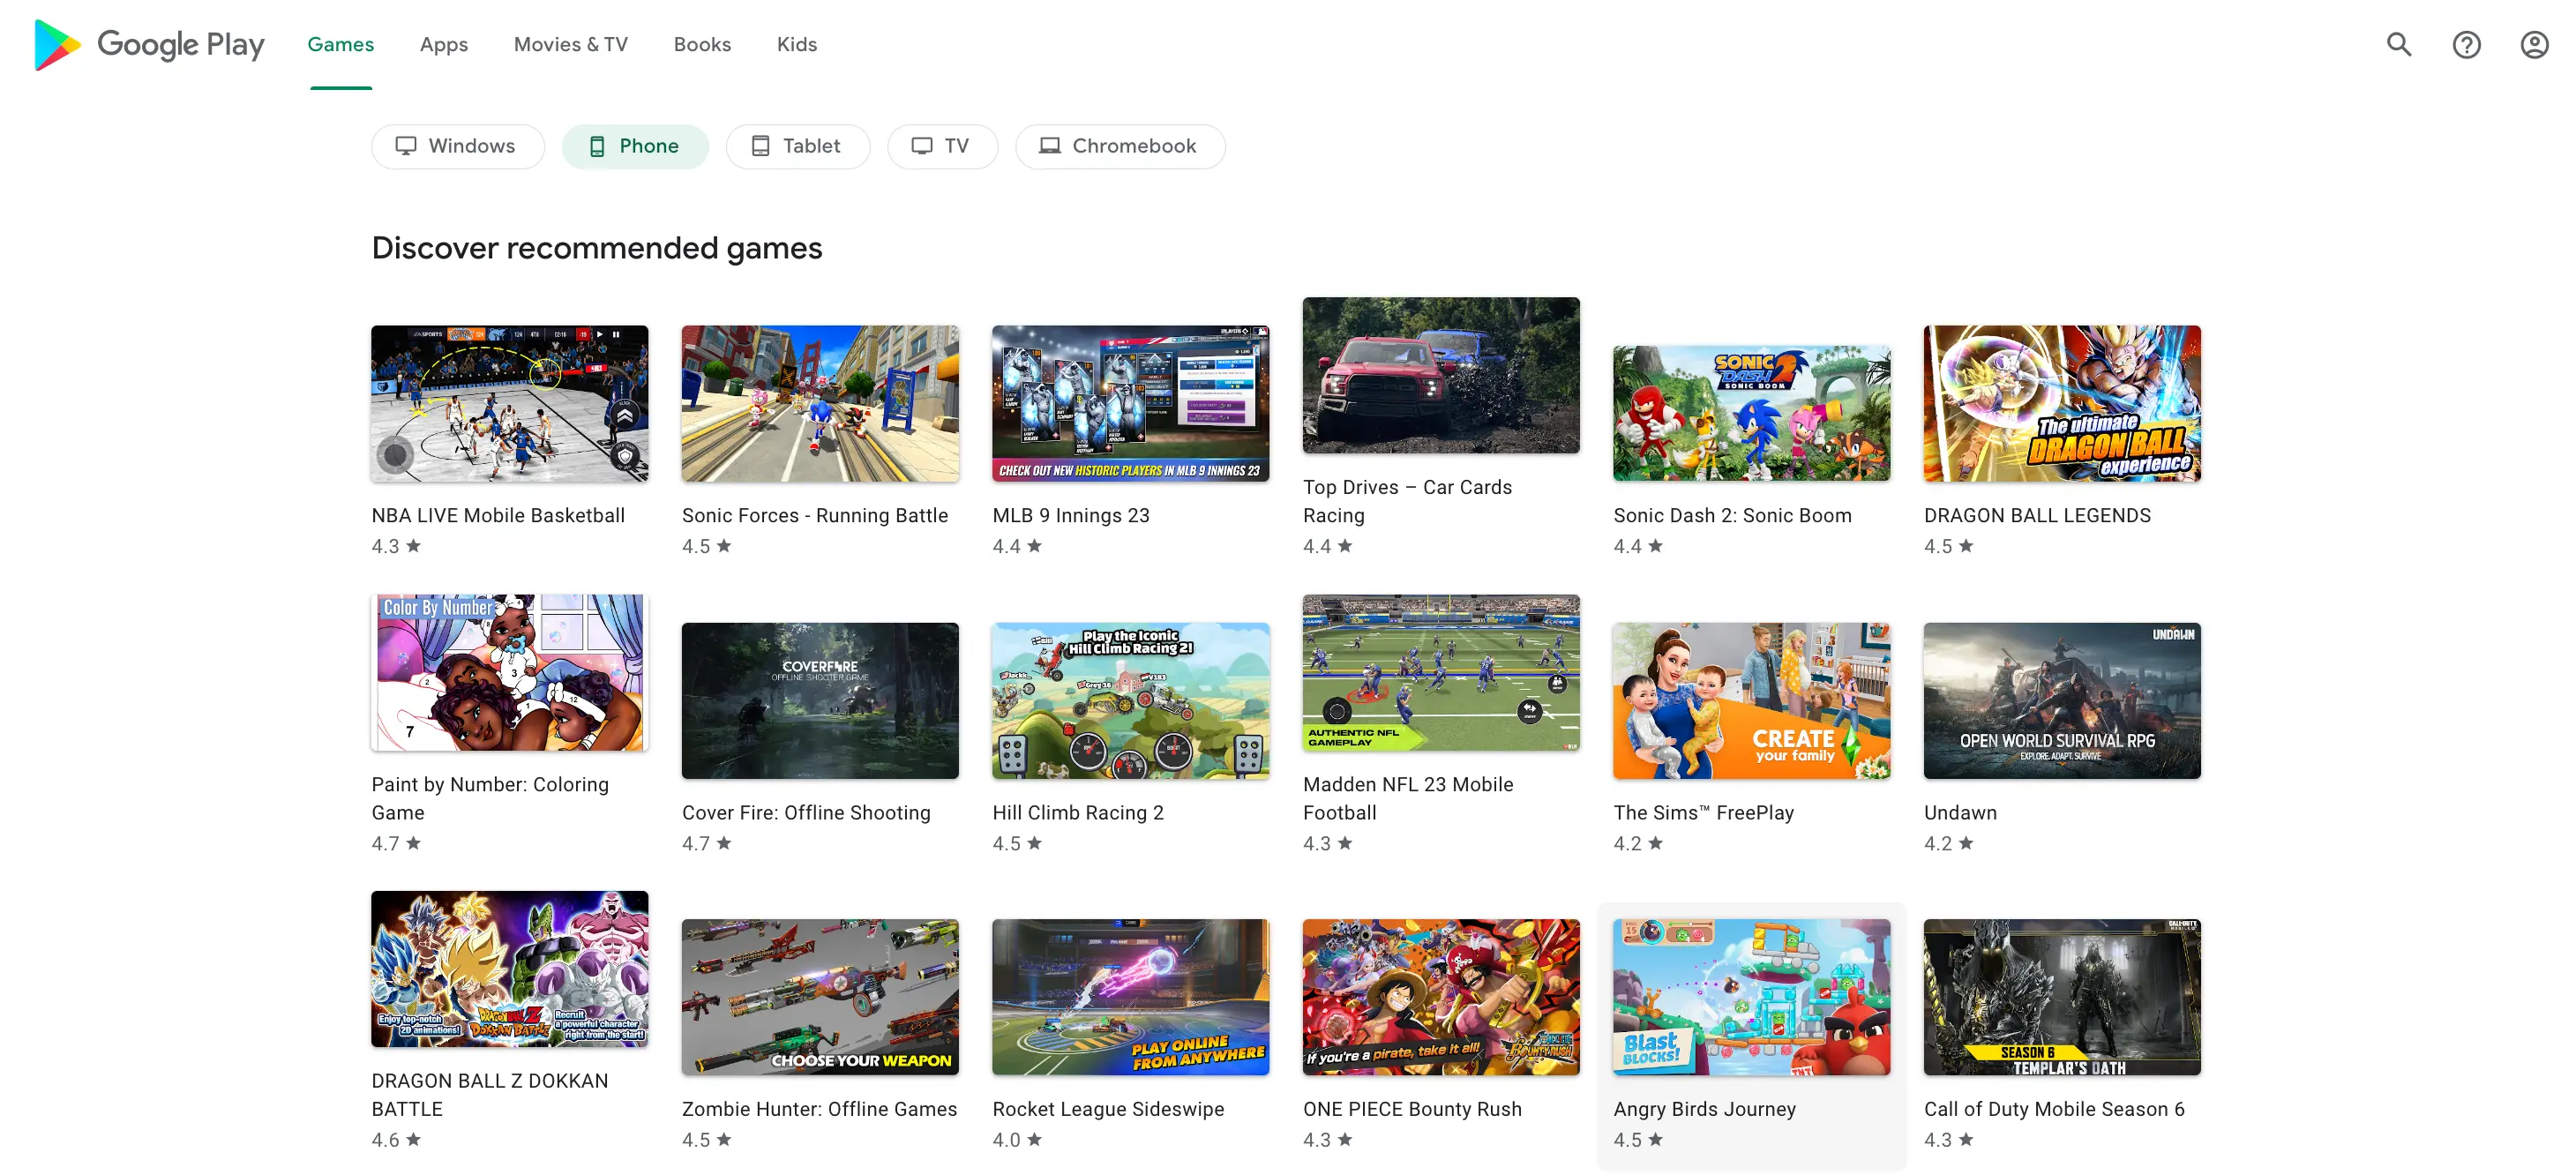 List Type Organic results overview for Google Play Games with section_page_token(Plain Search)